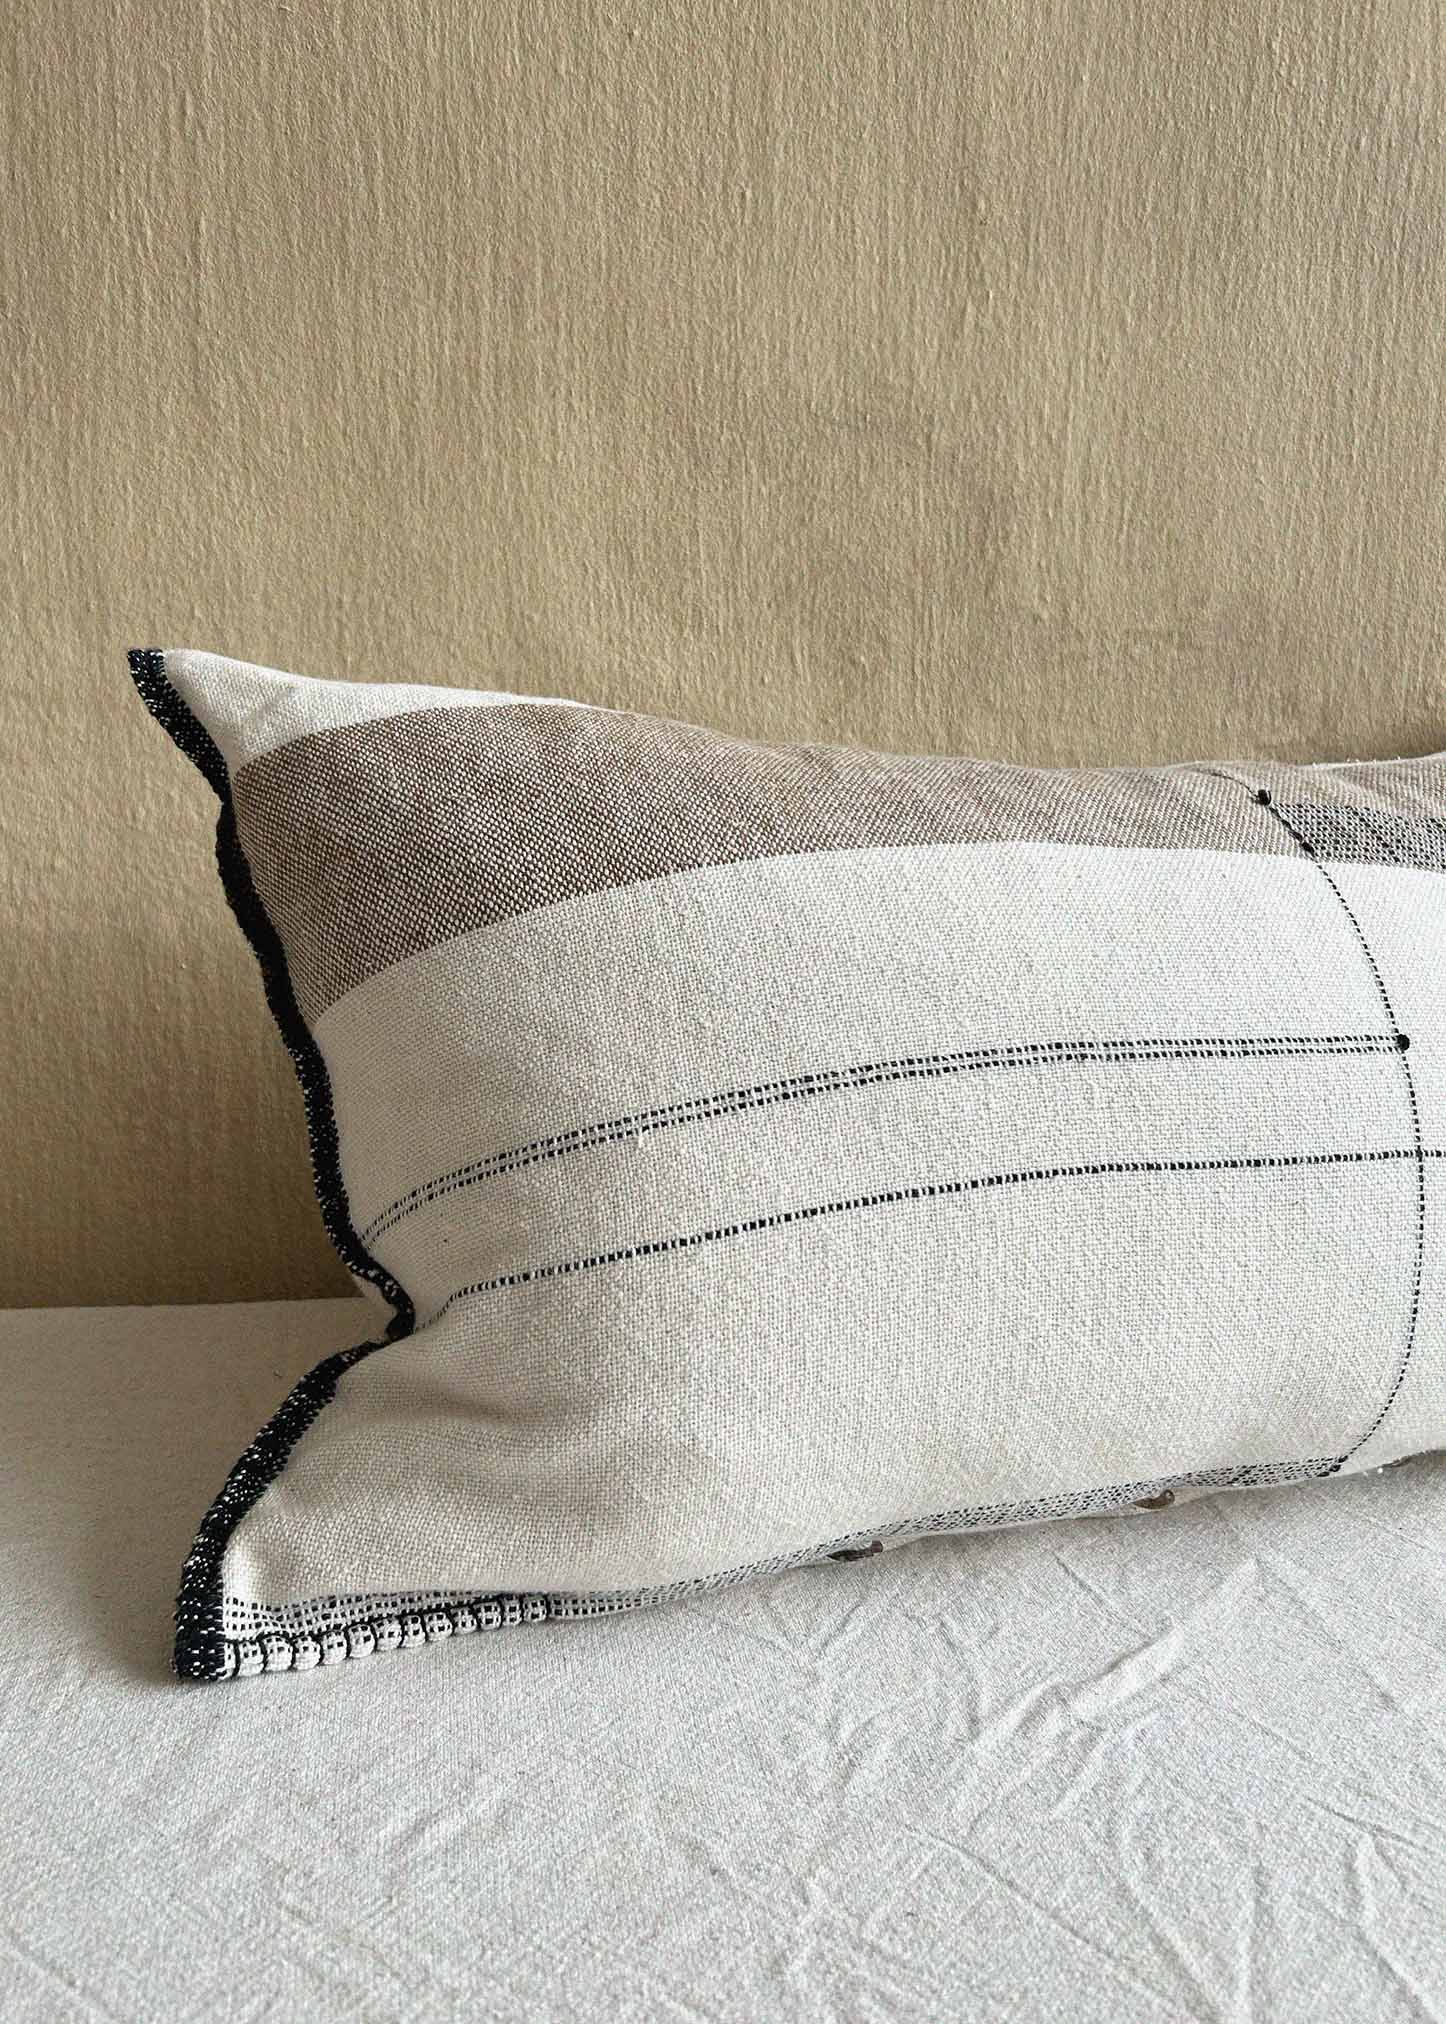 Handwoven, hand stitched local, natural cotton cushion featuring black borders and zen like lines